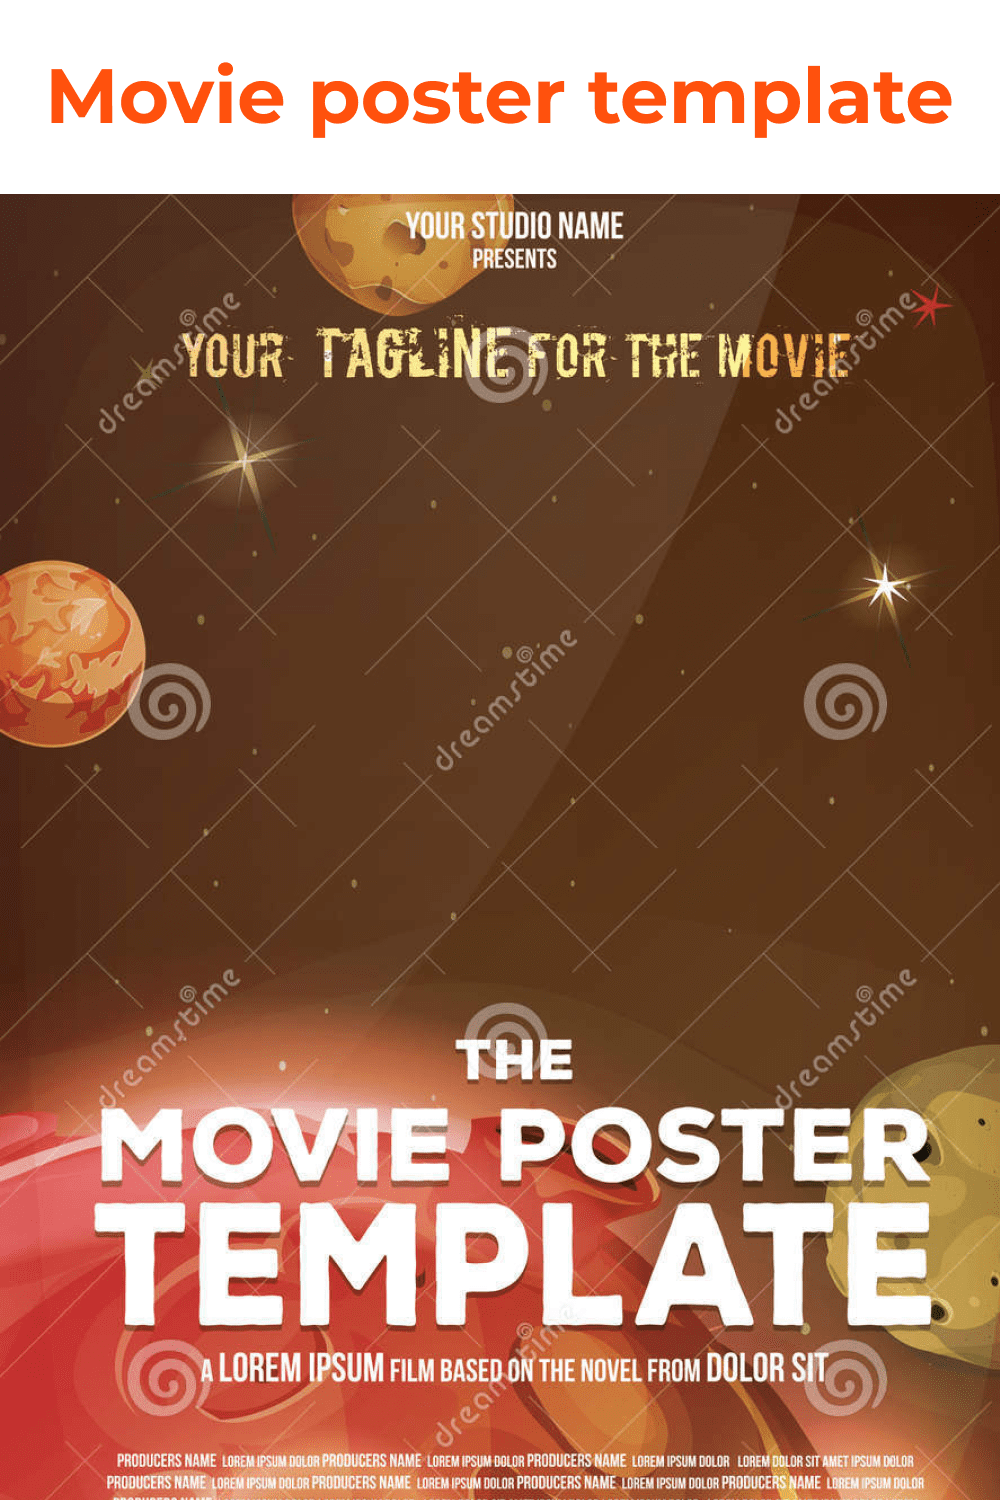 A film about space and life on other planets.